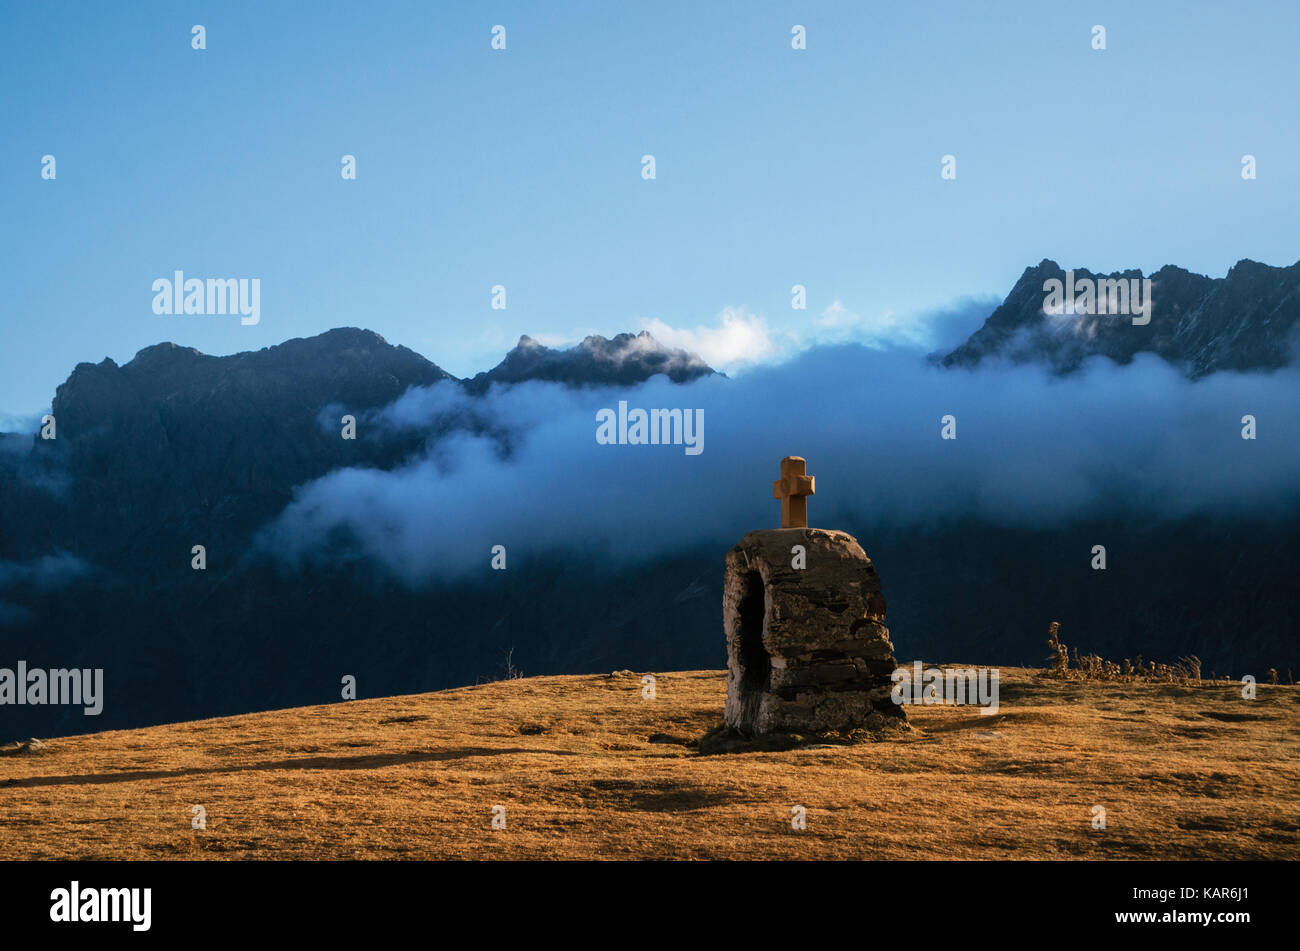 Christian Cross on stone on mountain among clouds. Morning time in autumn Stock Photo